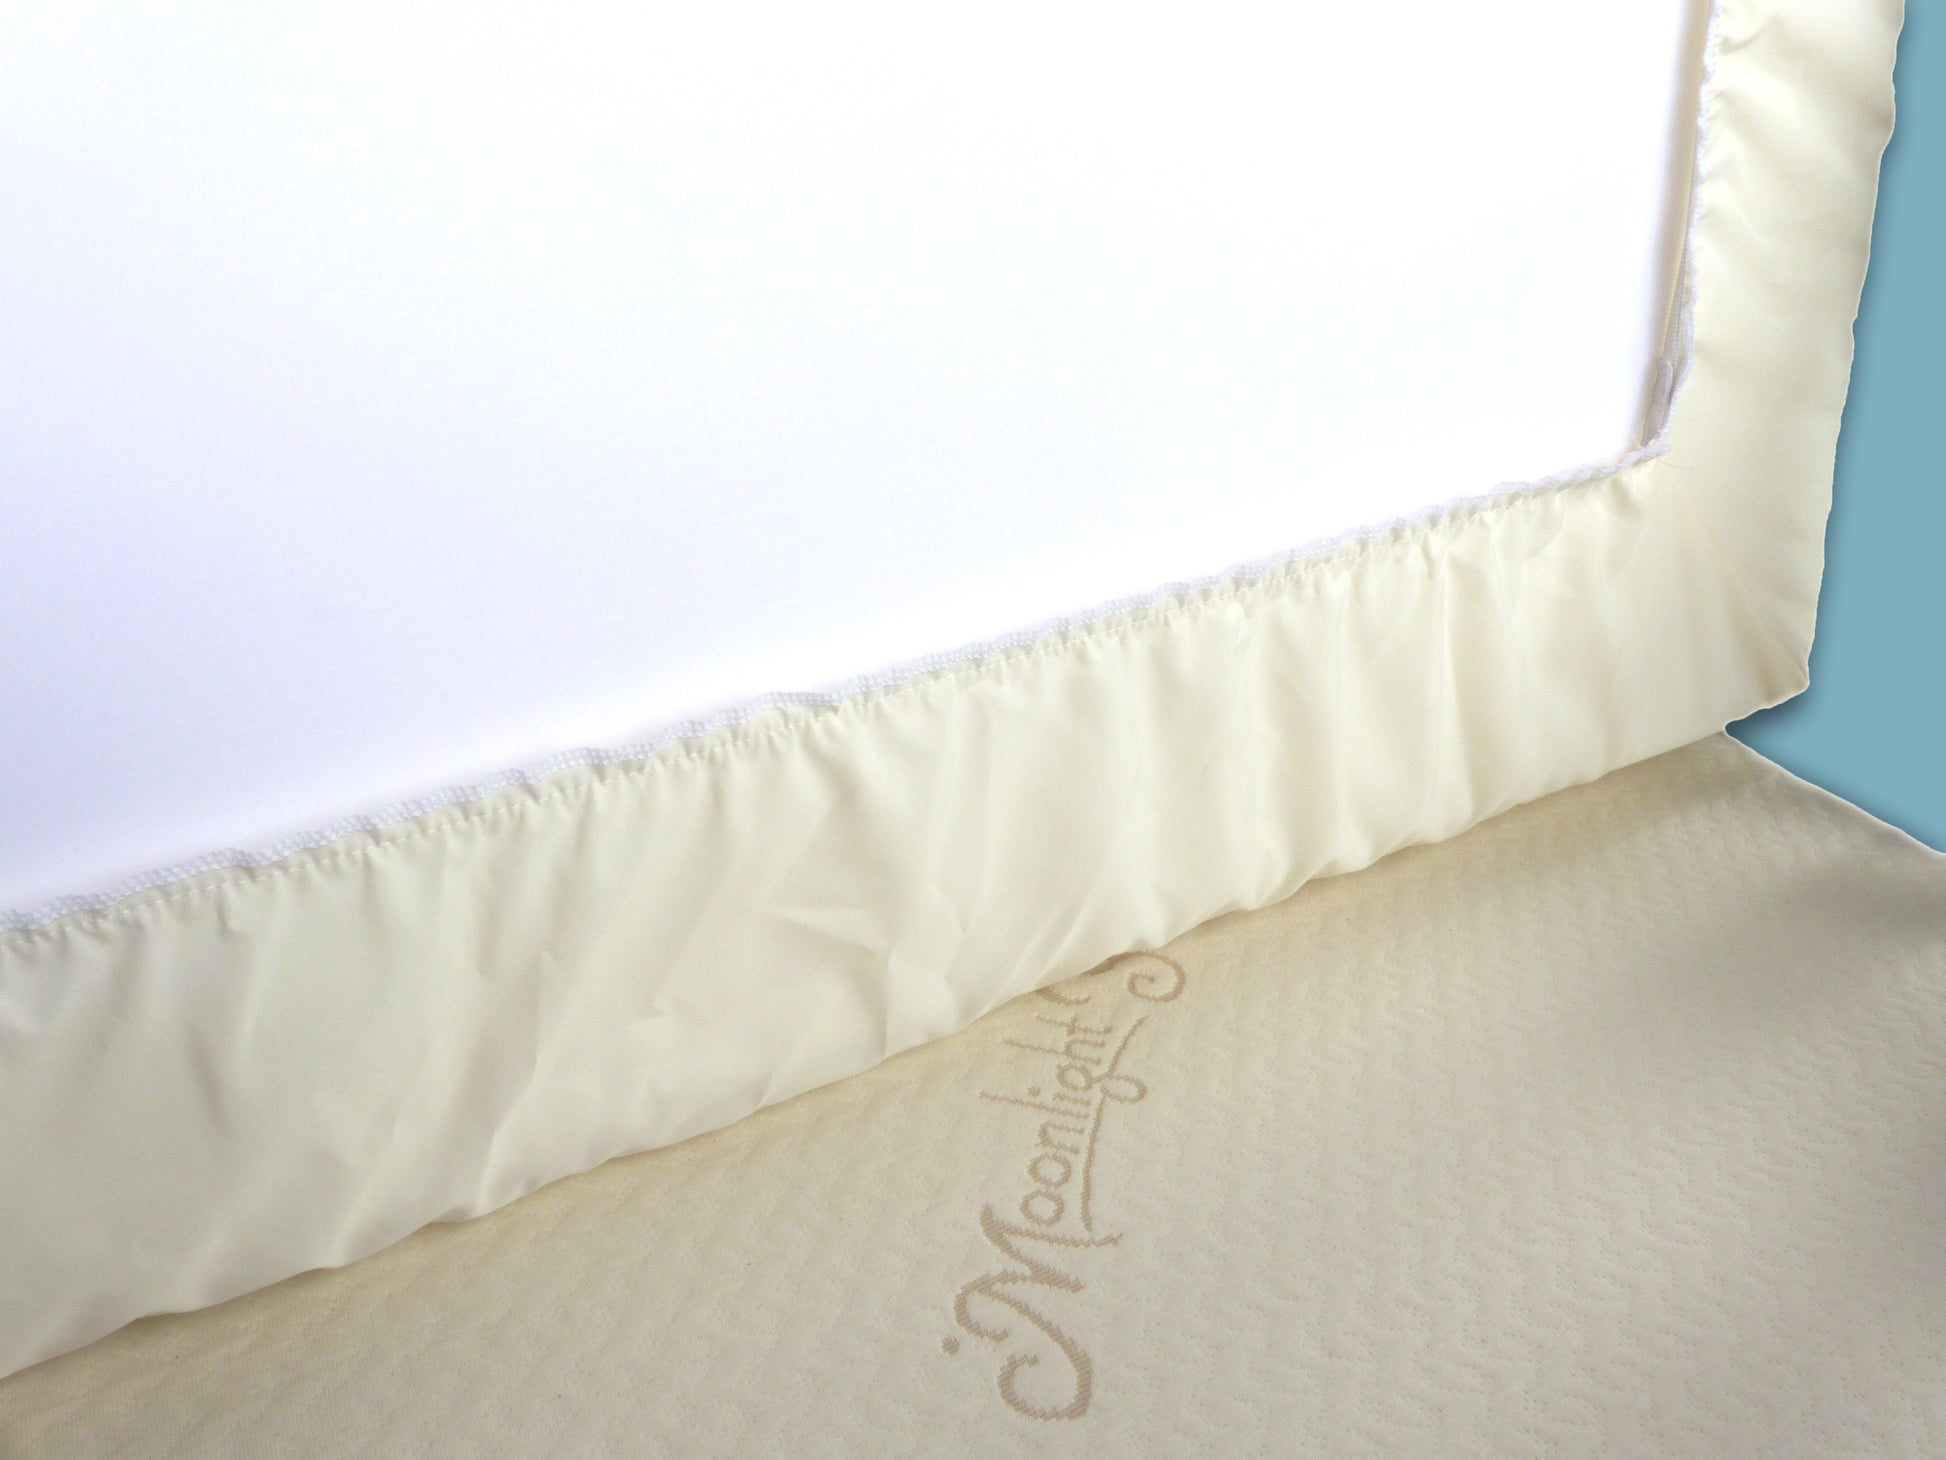 6 Best Baby Bed Protectors with Price, Best Product for Newborn, Waterproof Sheet